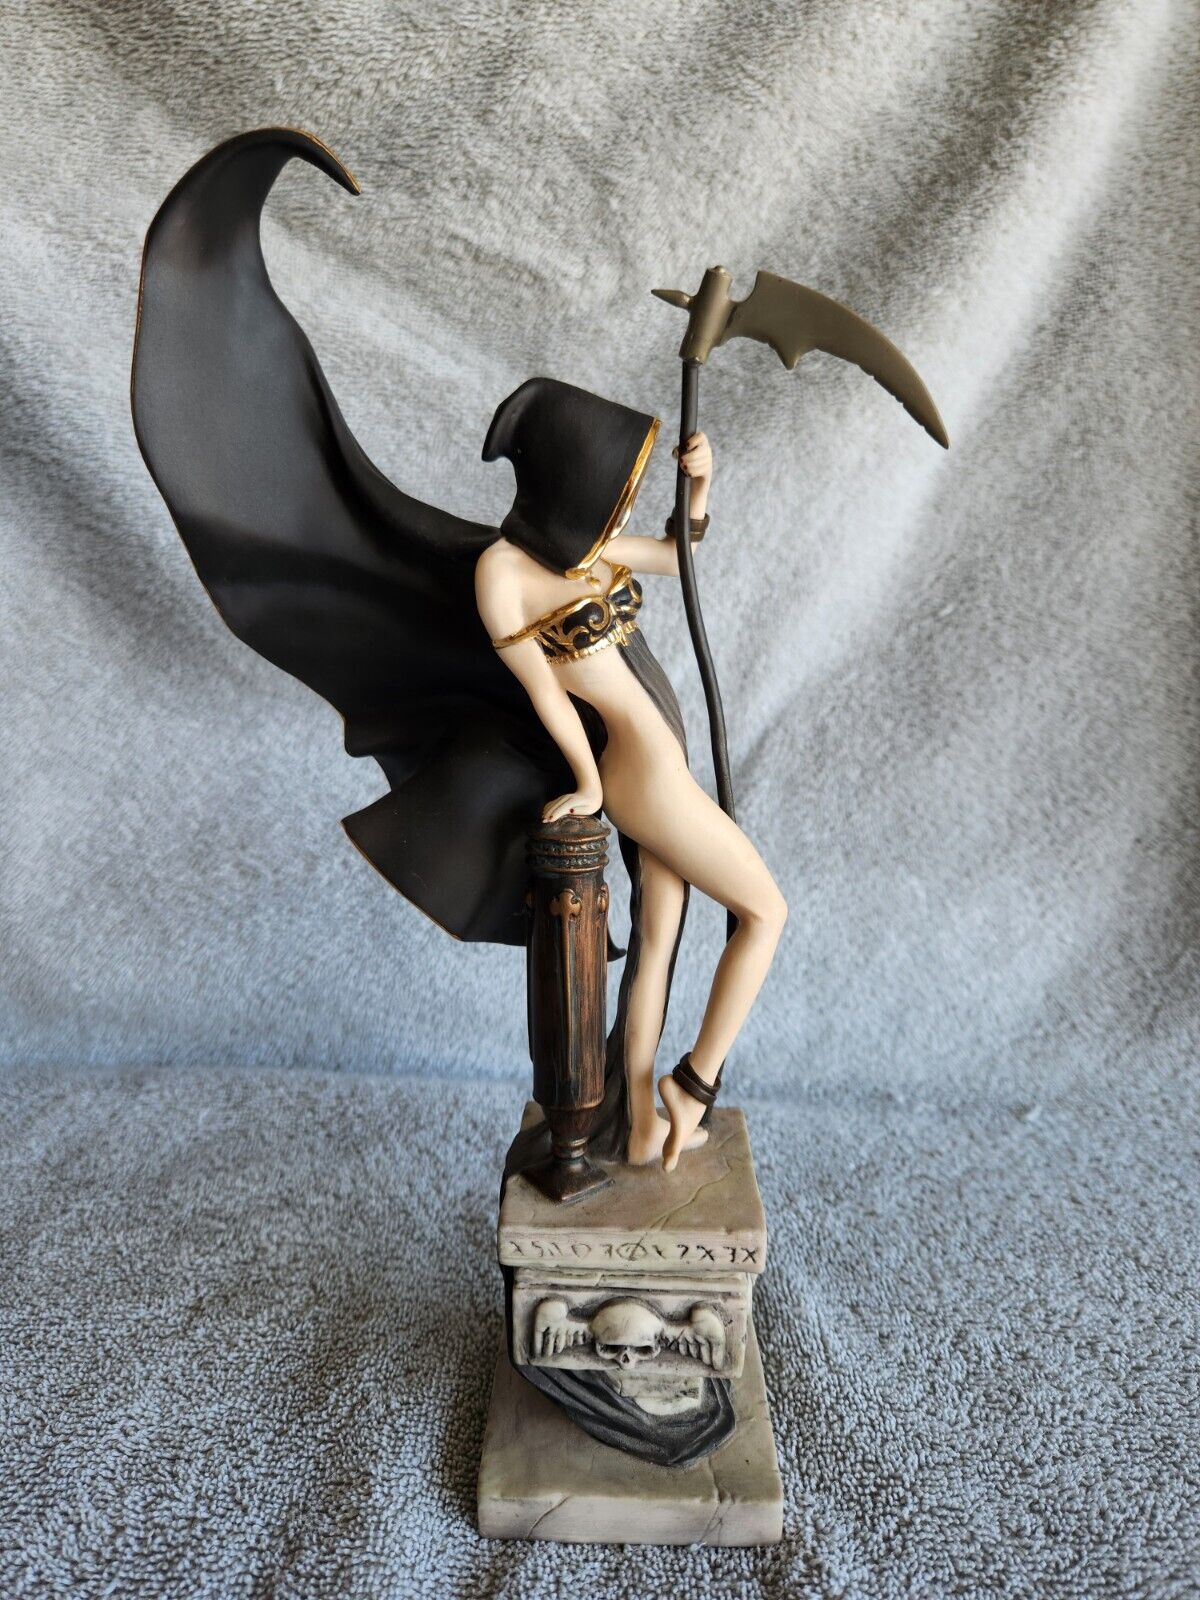 Mistress of Death by Brom Franklin Mint Limited Edition 3285/9500